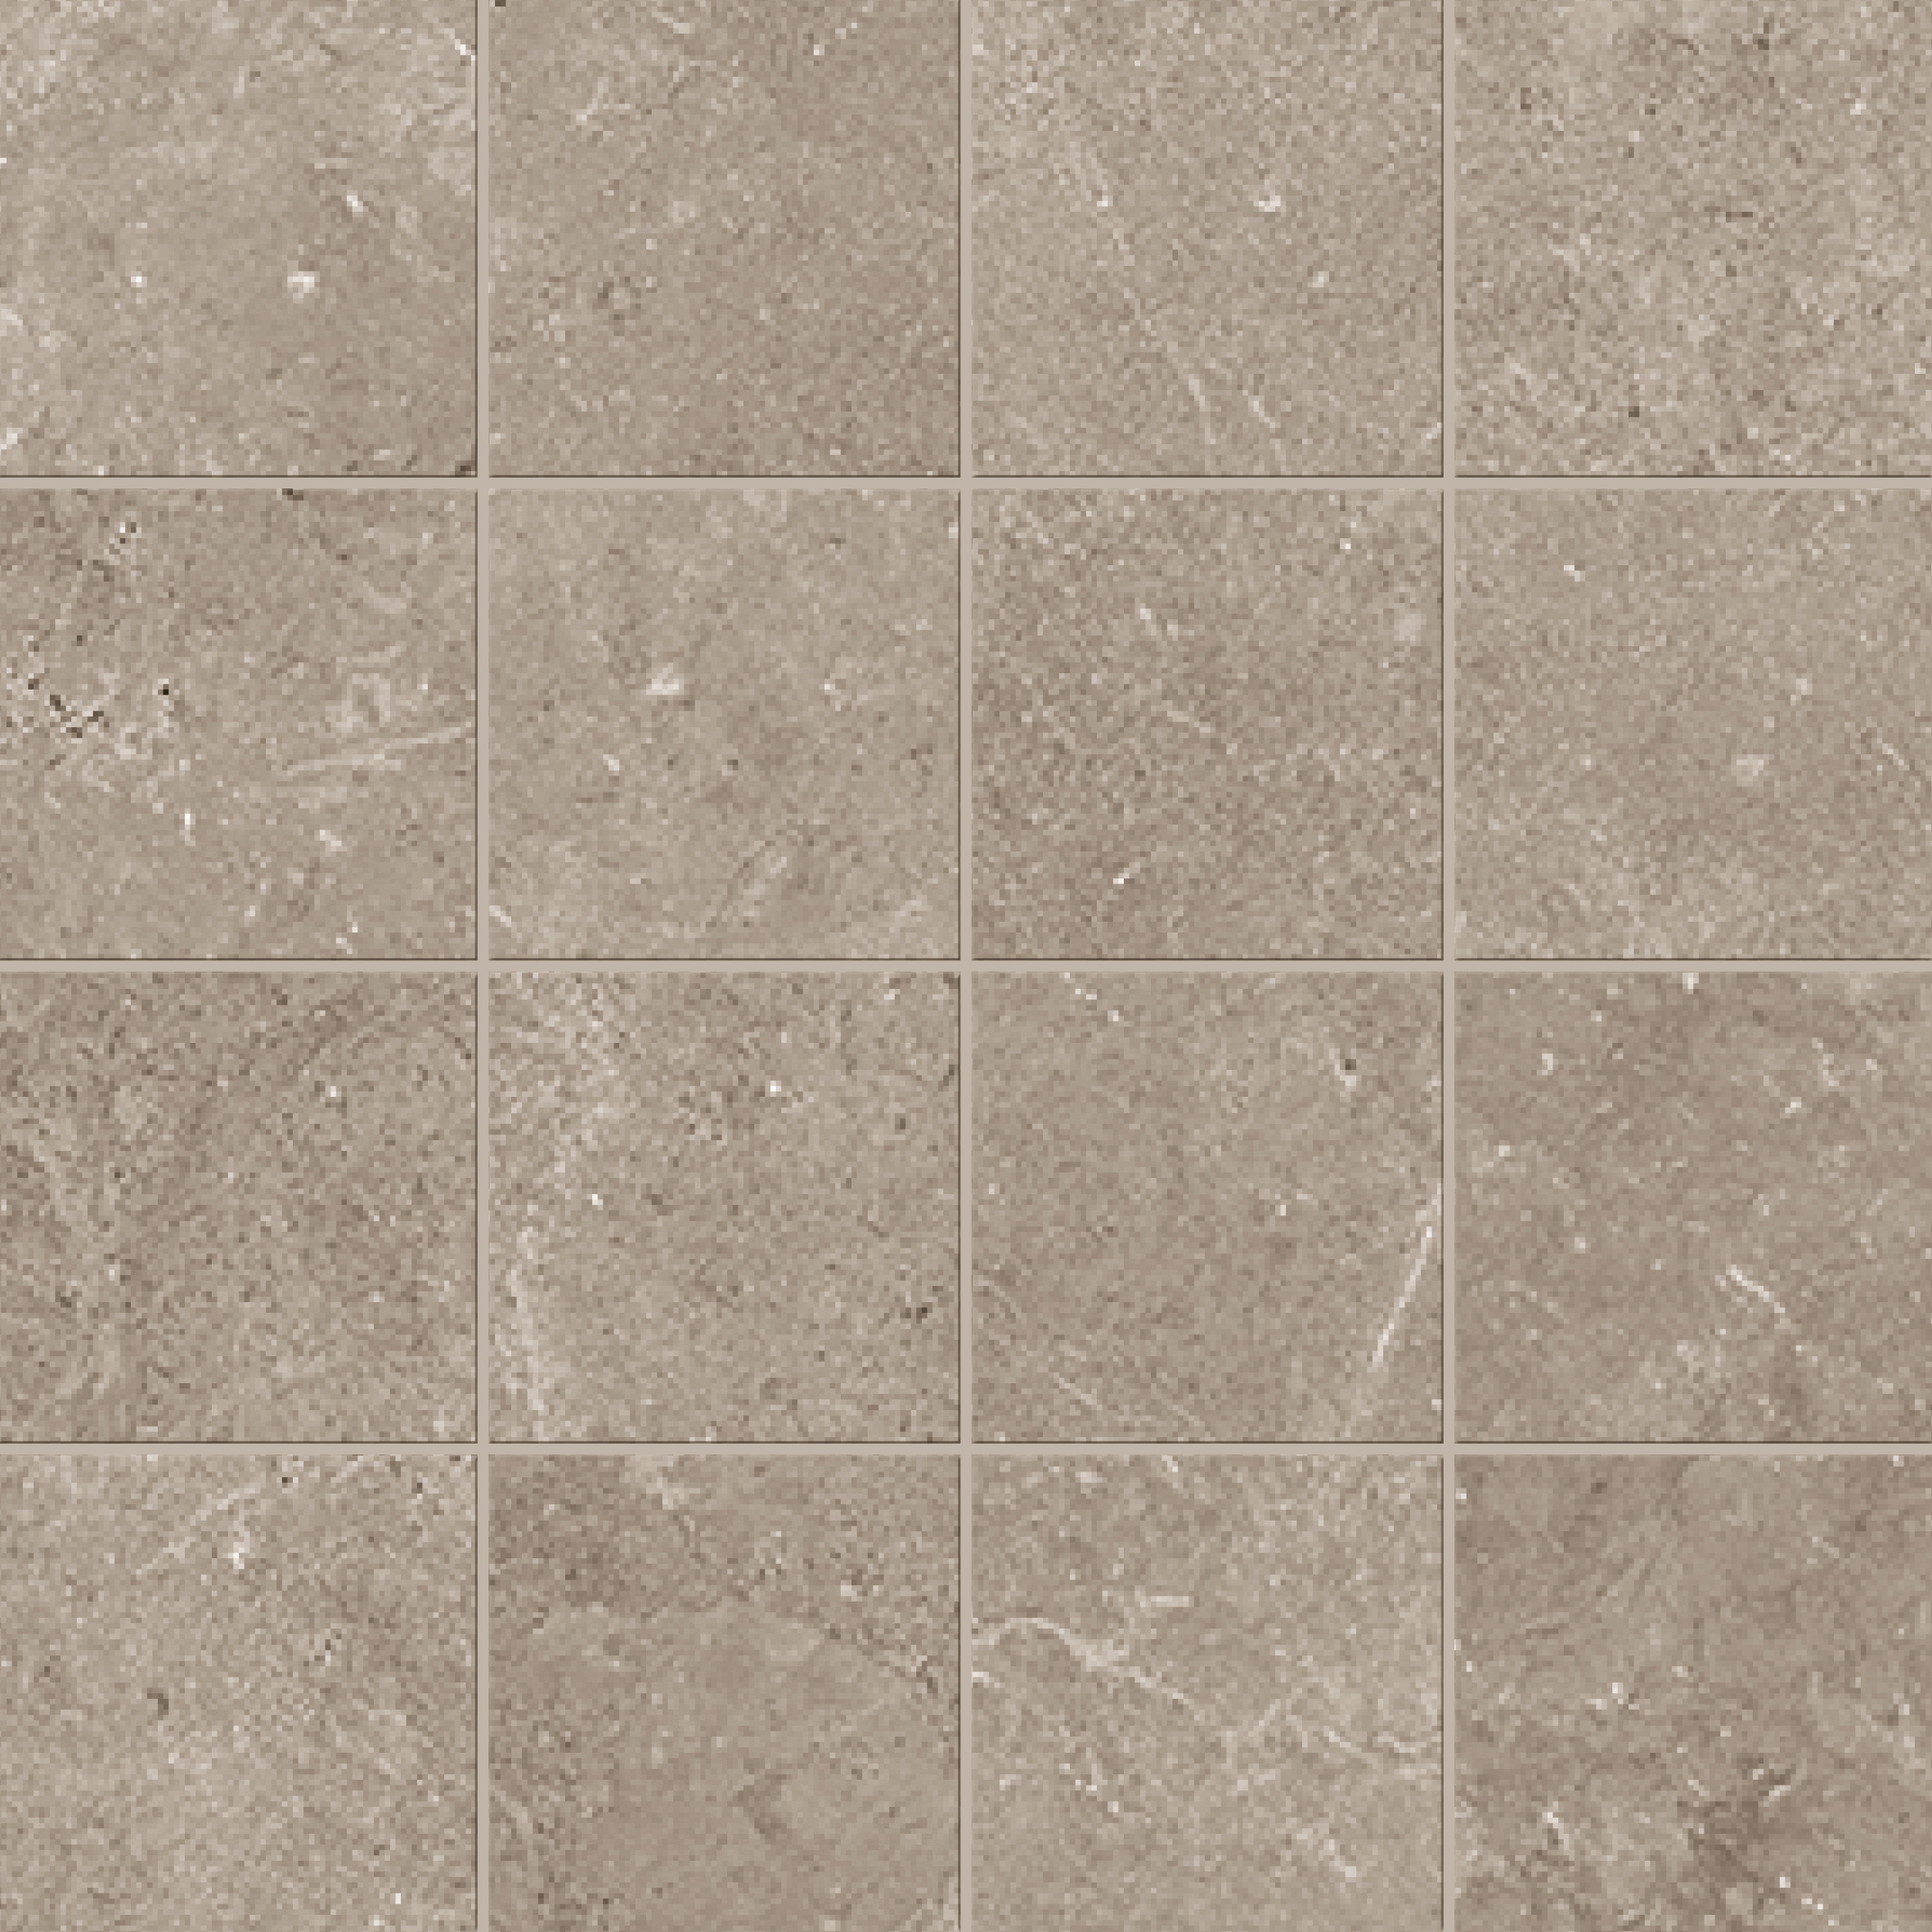 Panaria Prime Stone Greige Prime Antibacterial - Soft Mosaic 16 Pezzi PGZPM30 30x30cm rectified 9,5mm